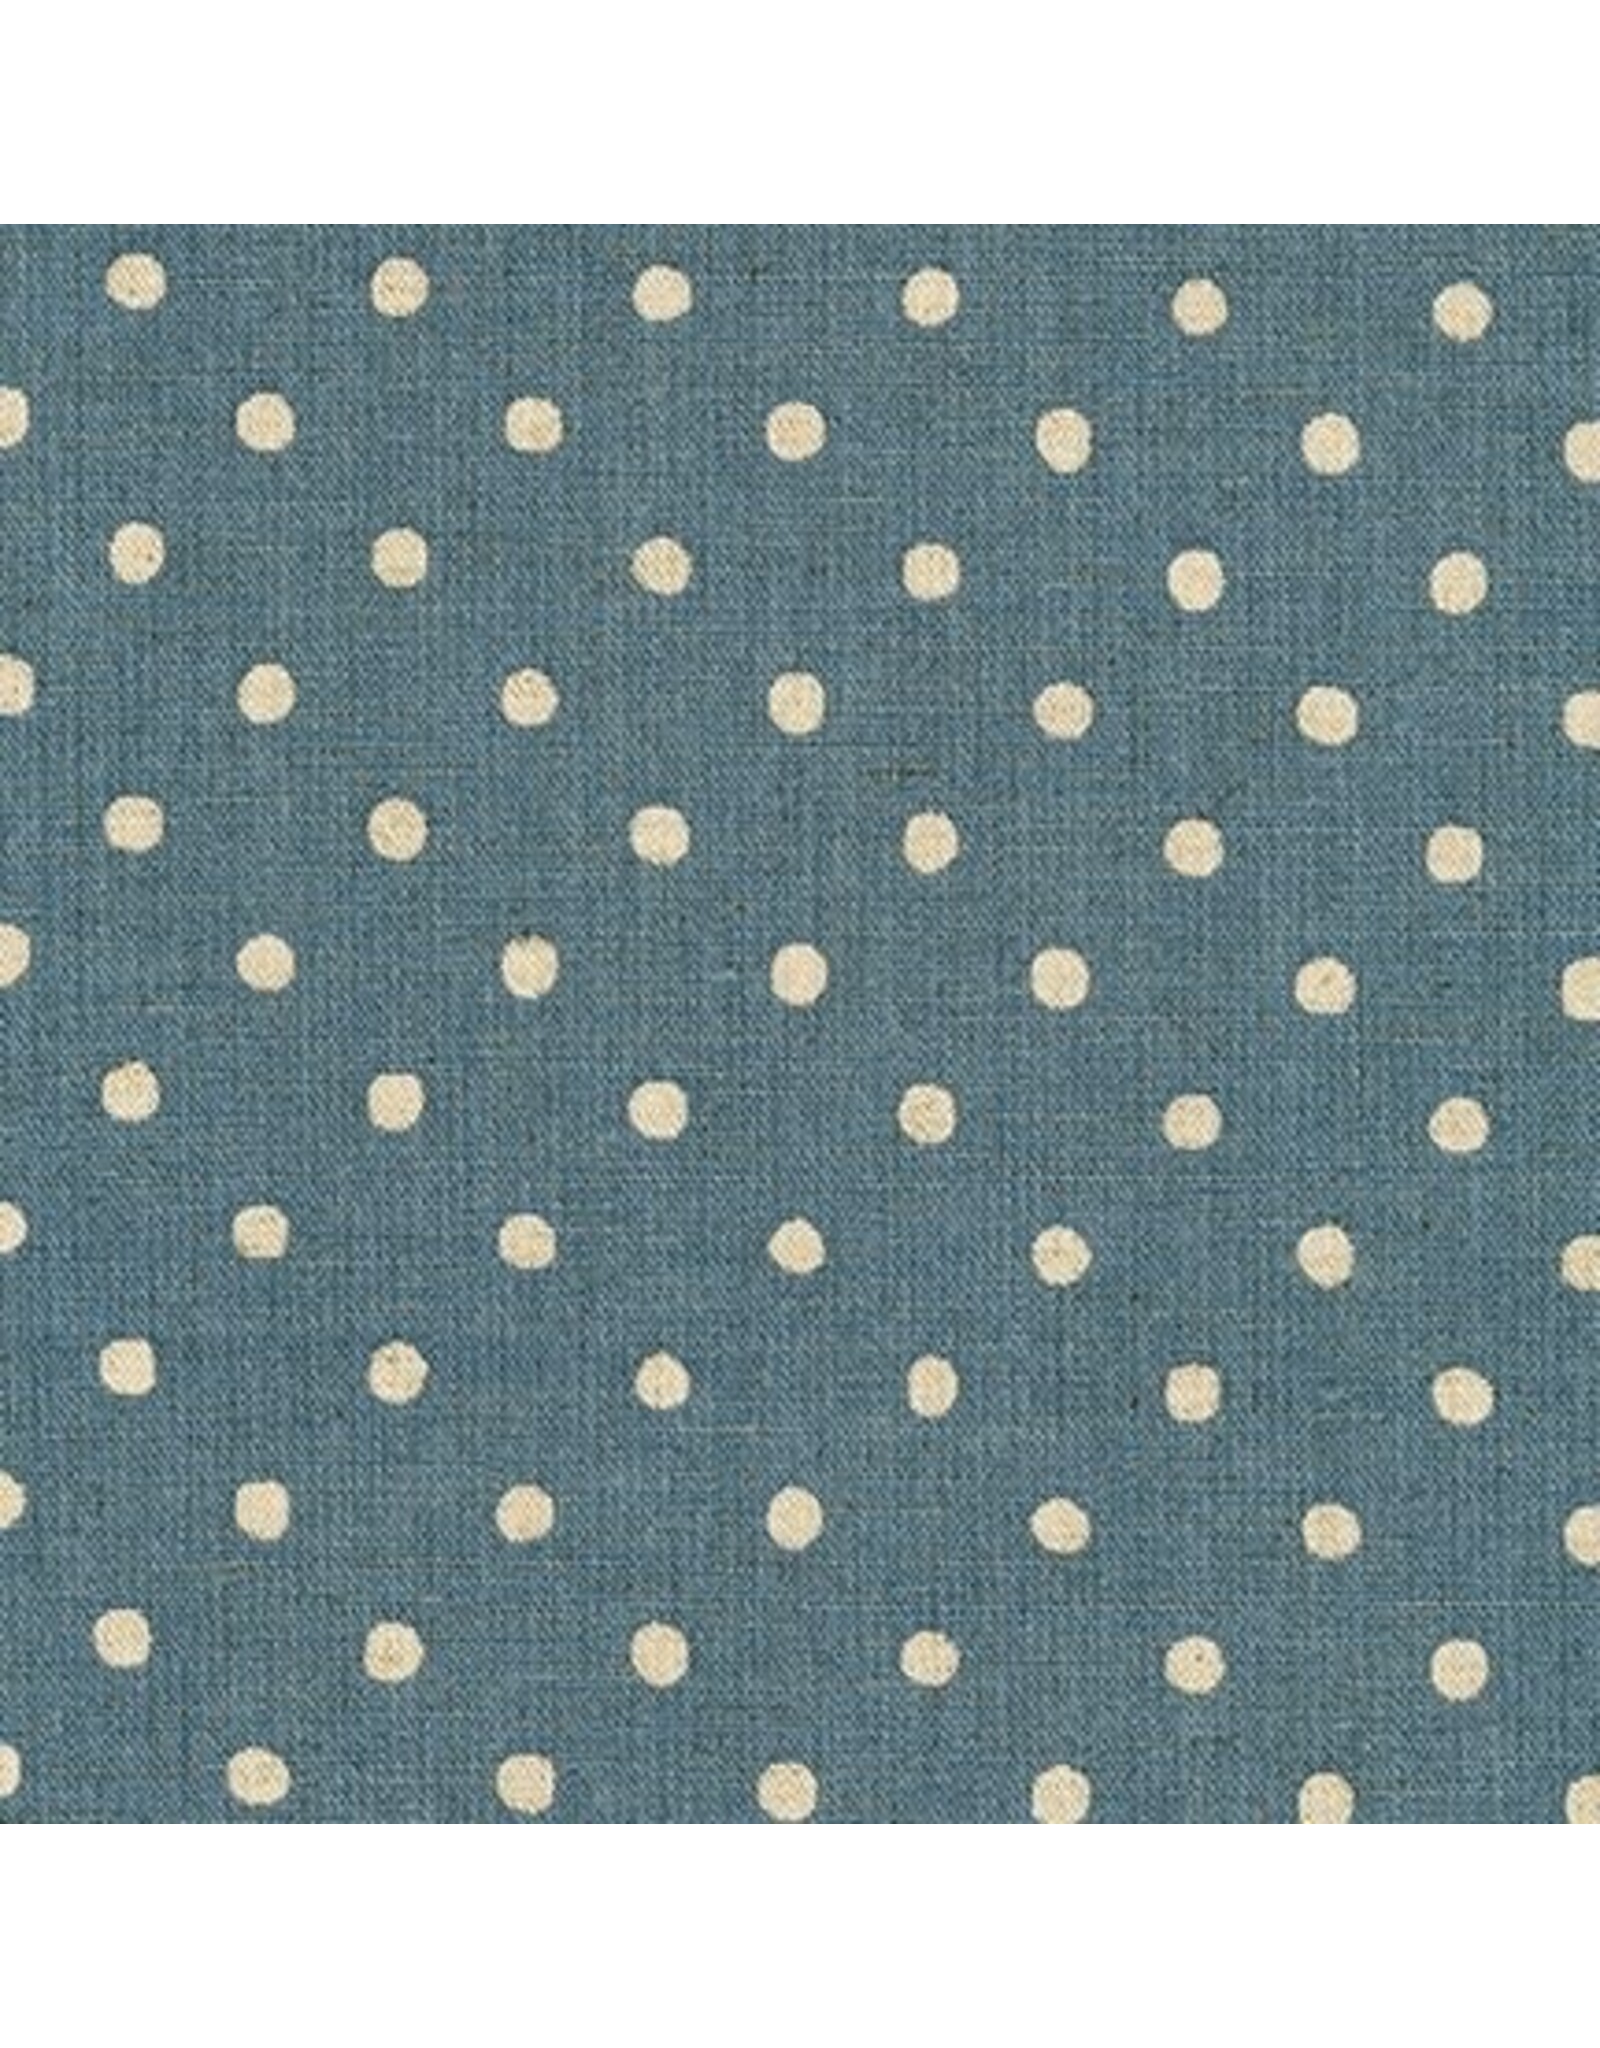 Sevenberry Linen Flax Canvas Natural Dots in Denim, Fabric Half-Yards